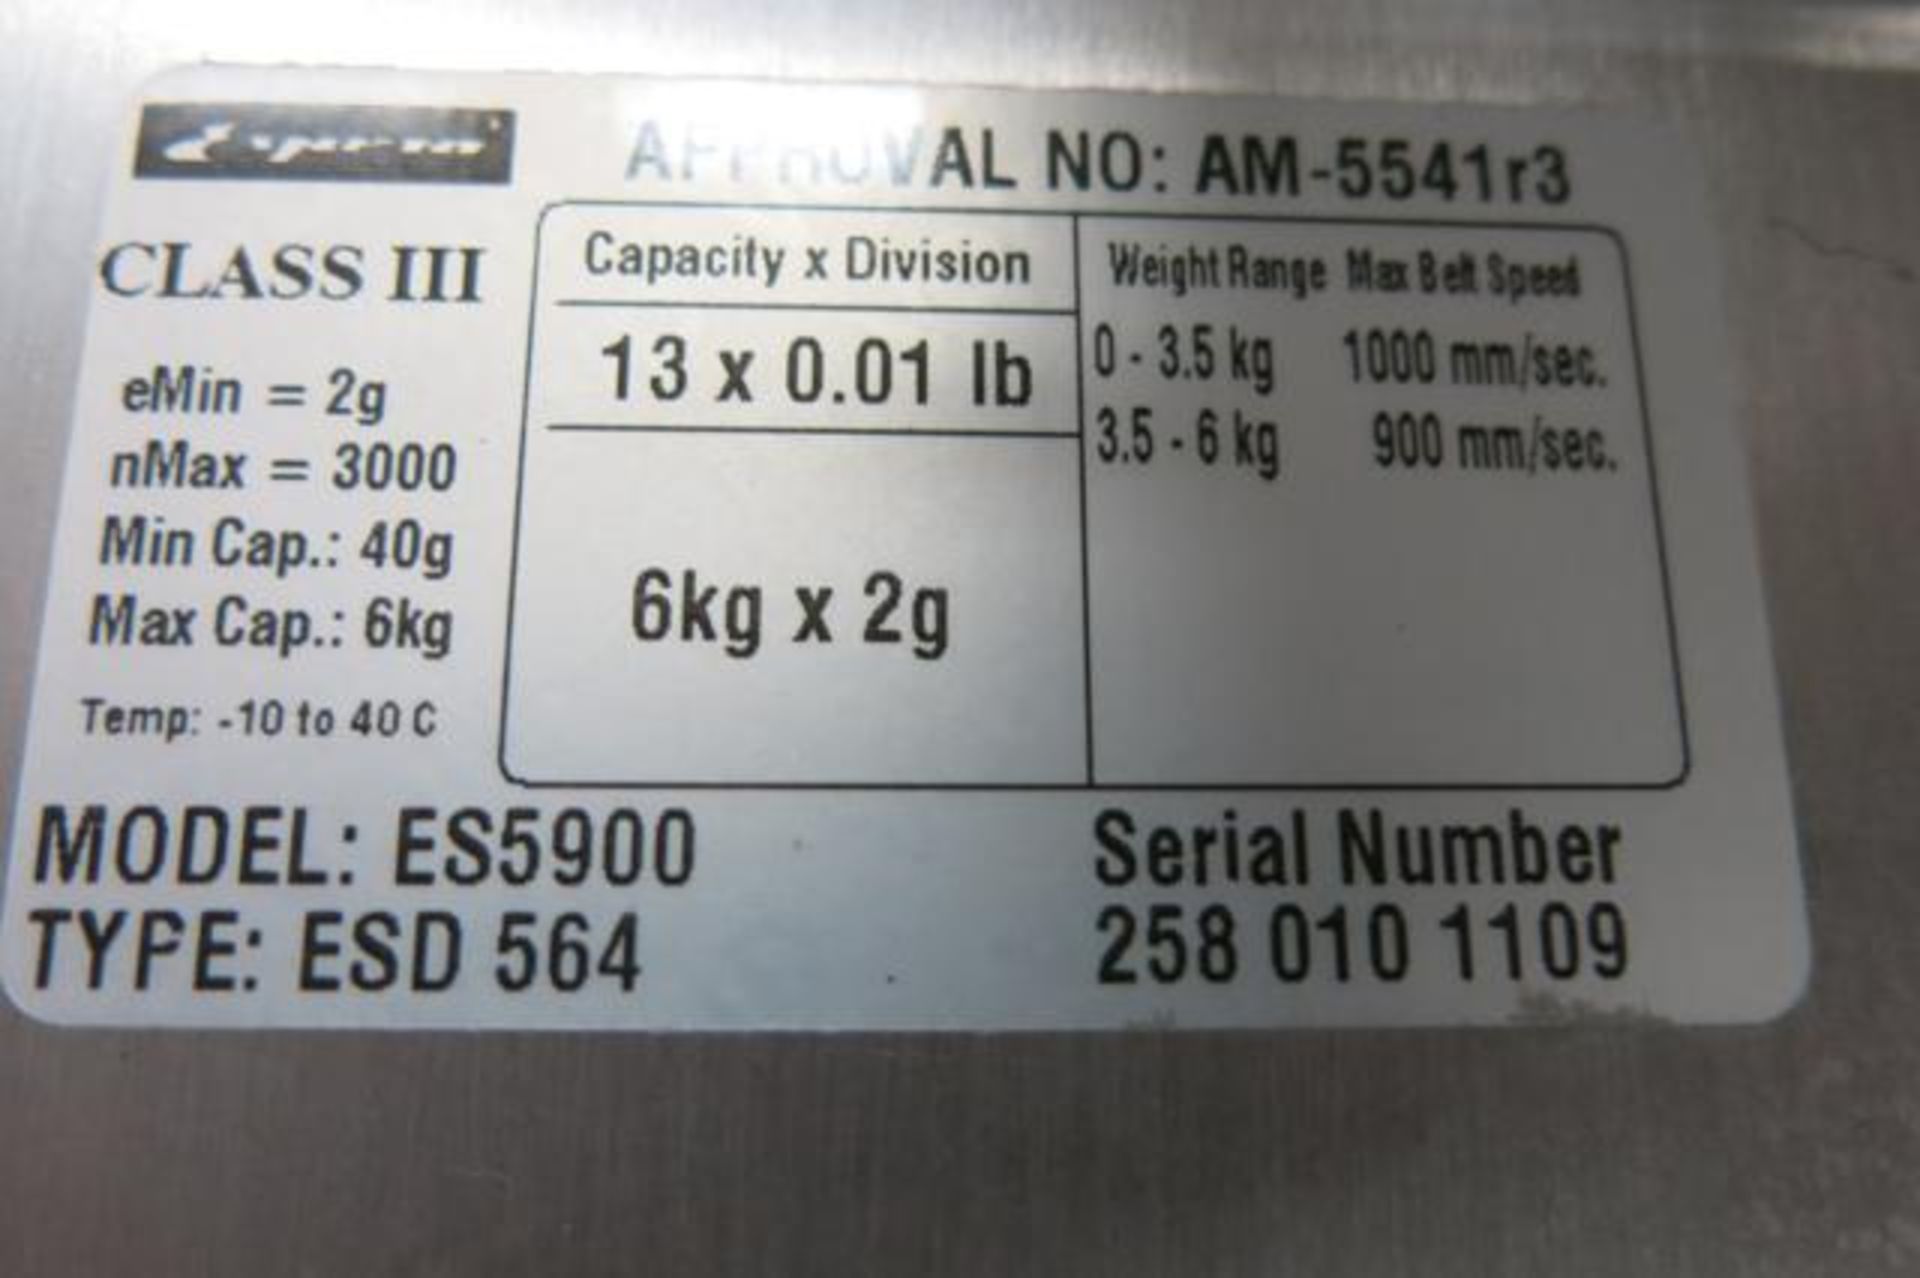 ESPERA, ES5900, STAINLESS STEEL, AUTOMATIC WEIGHING AND LABELING MACHINE, S/N 454 050 1851 - Image 10 of 12